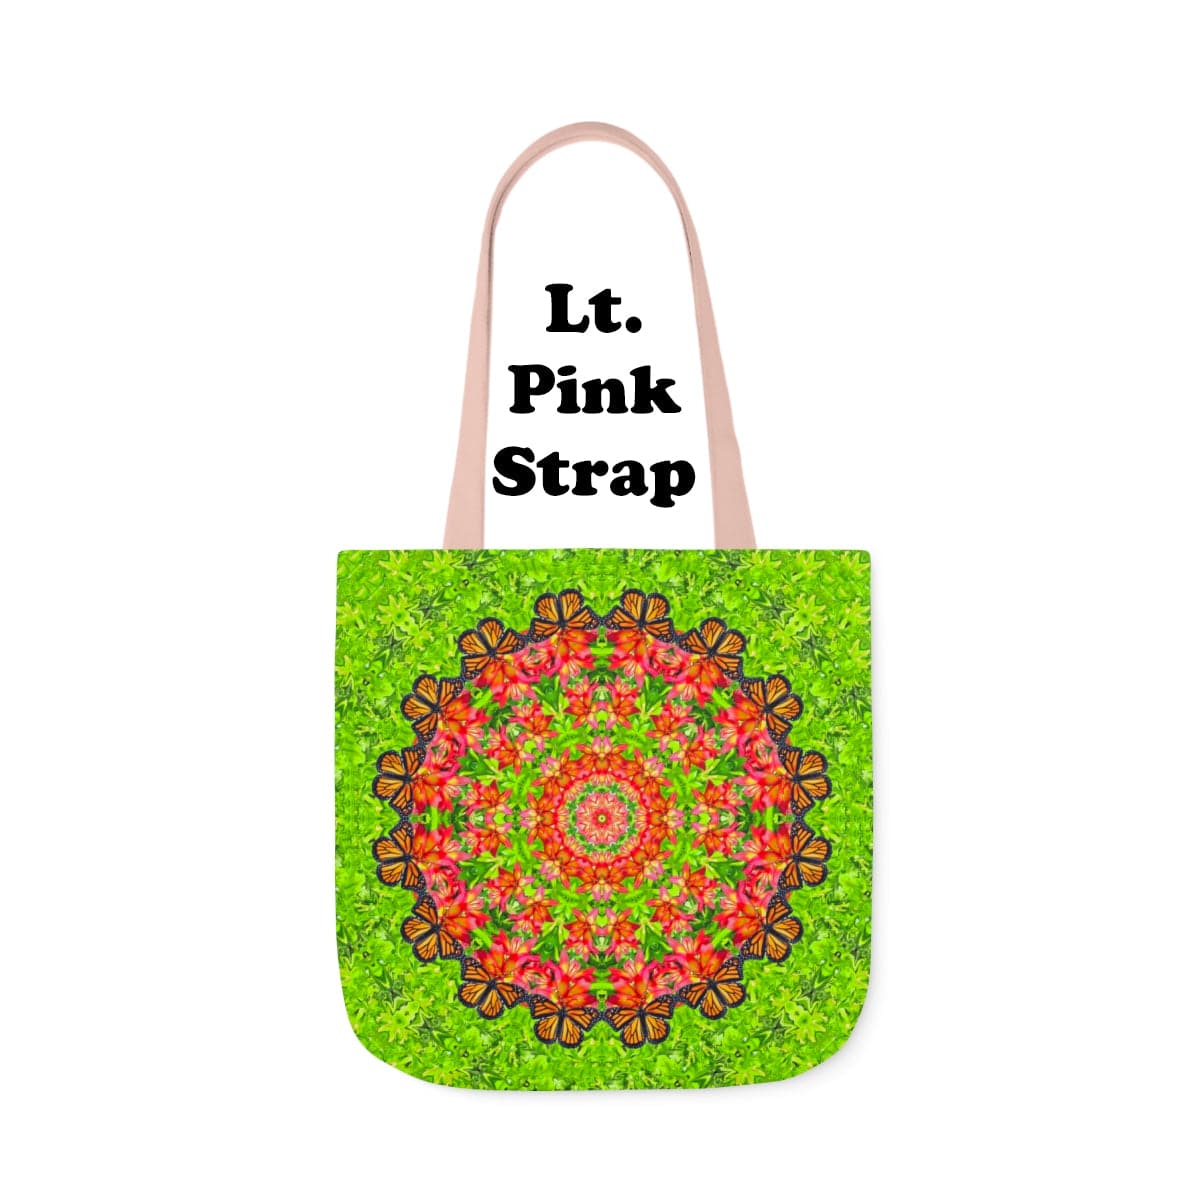 Graphic Butterfly Tote Bag  Cute and Functional For Everyday, Work And Shopping Captivating Calliope lt. pink strap